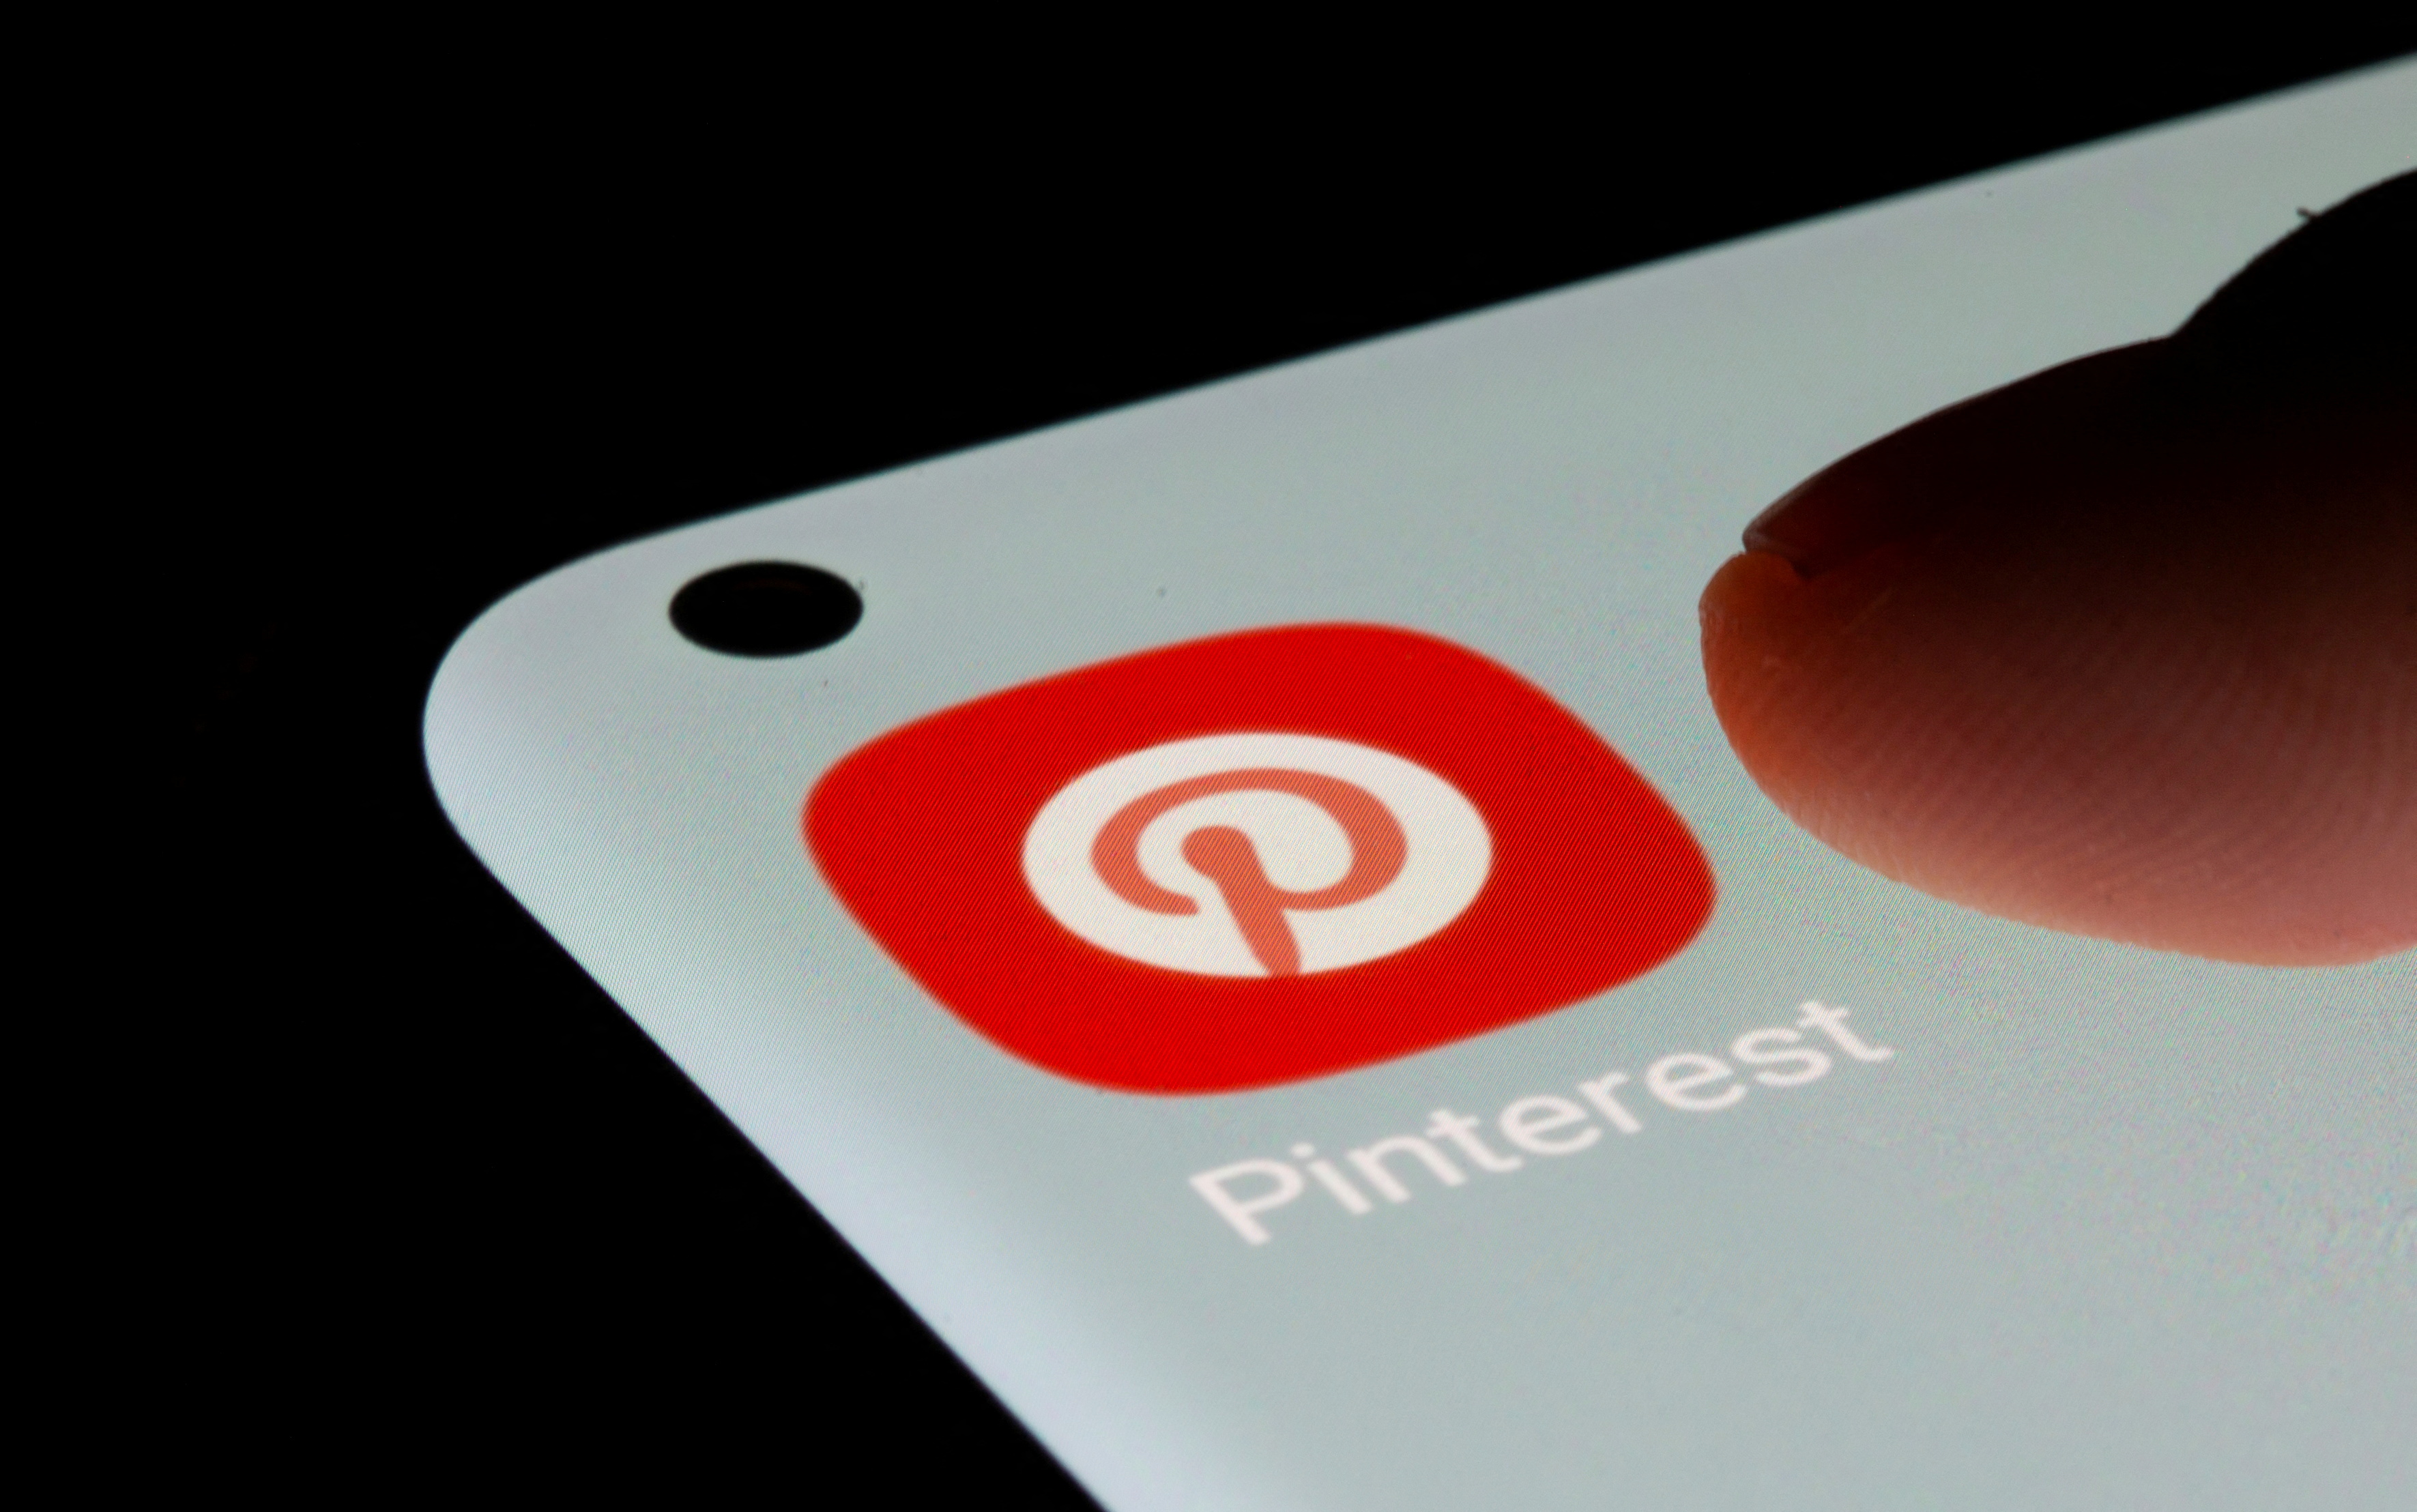 Pinterest app is seen on a smartphone in this illustration